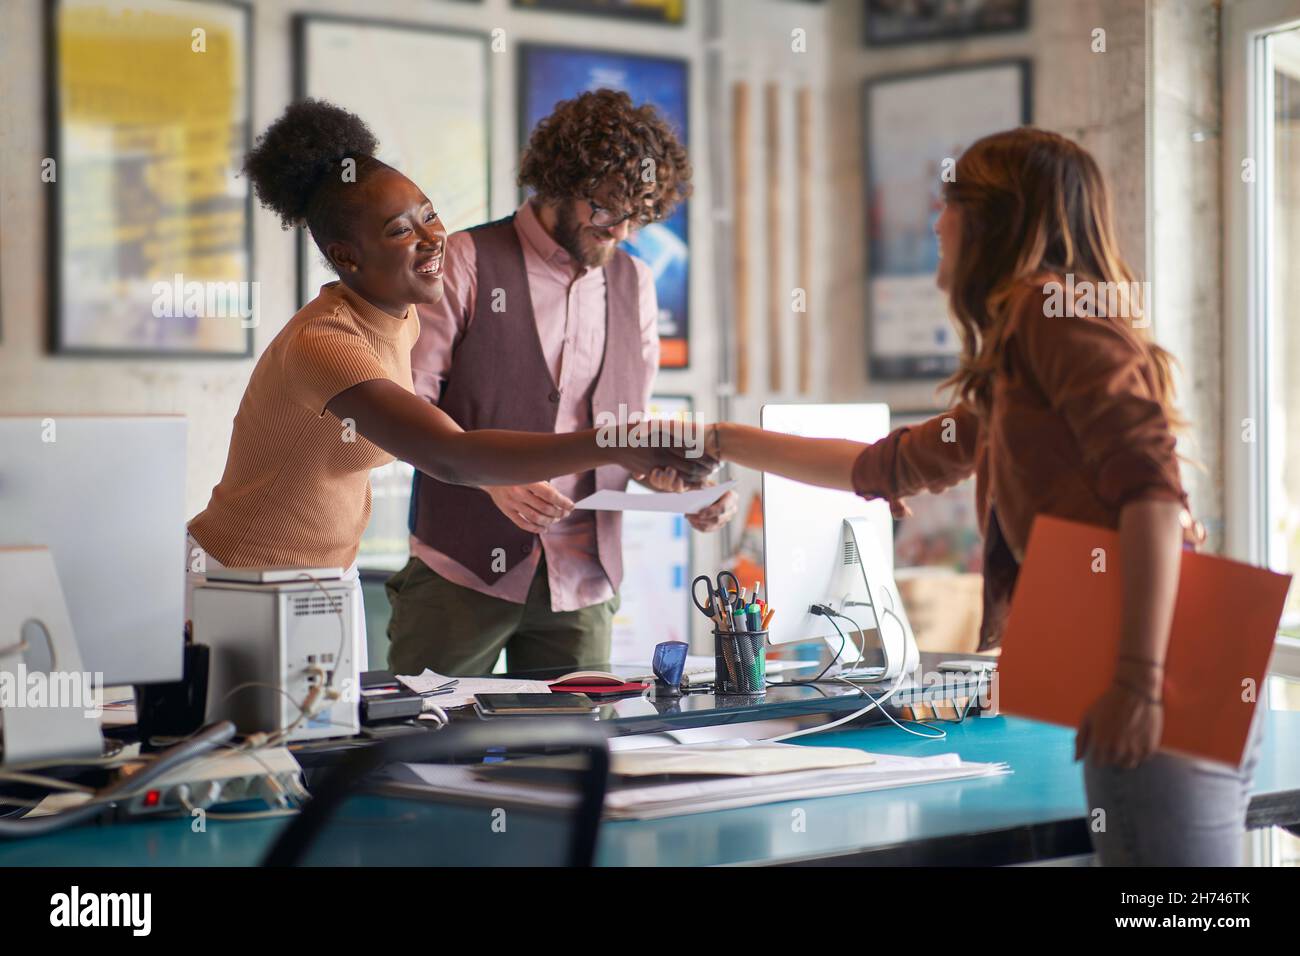 afro american and caucasian females shaking hands over the desk in office with beardy male holding and reading document Stock Photo